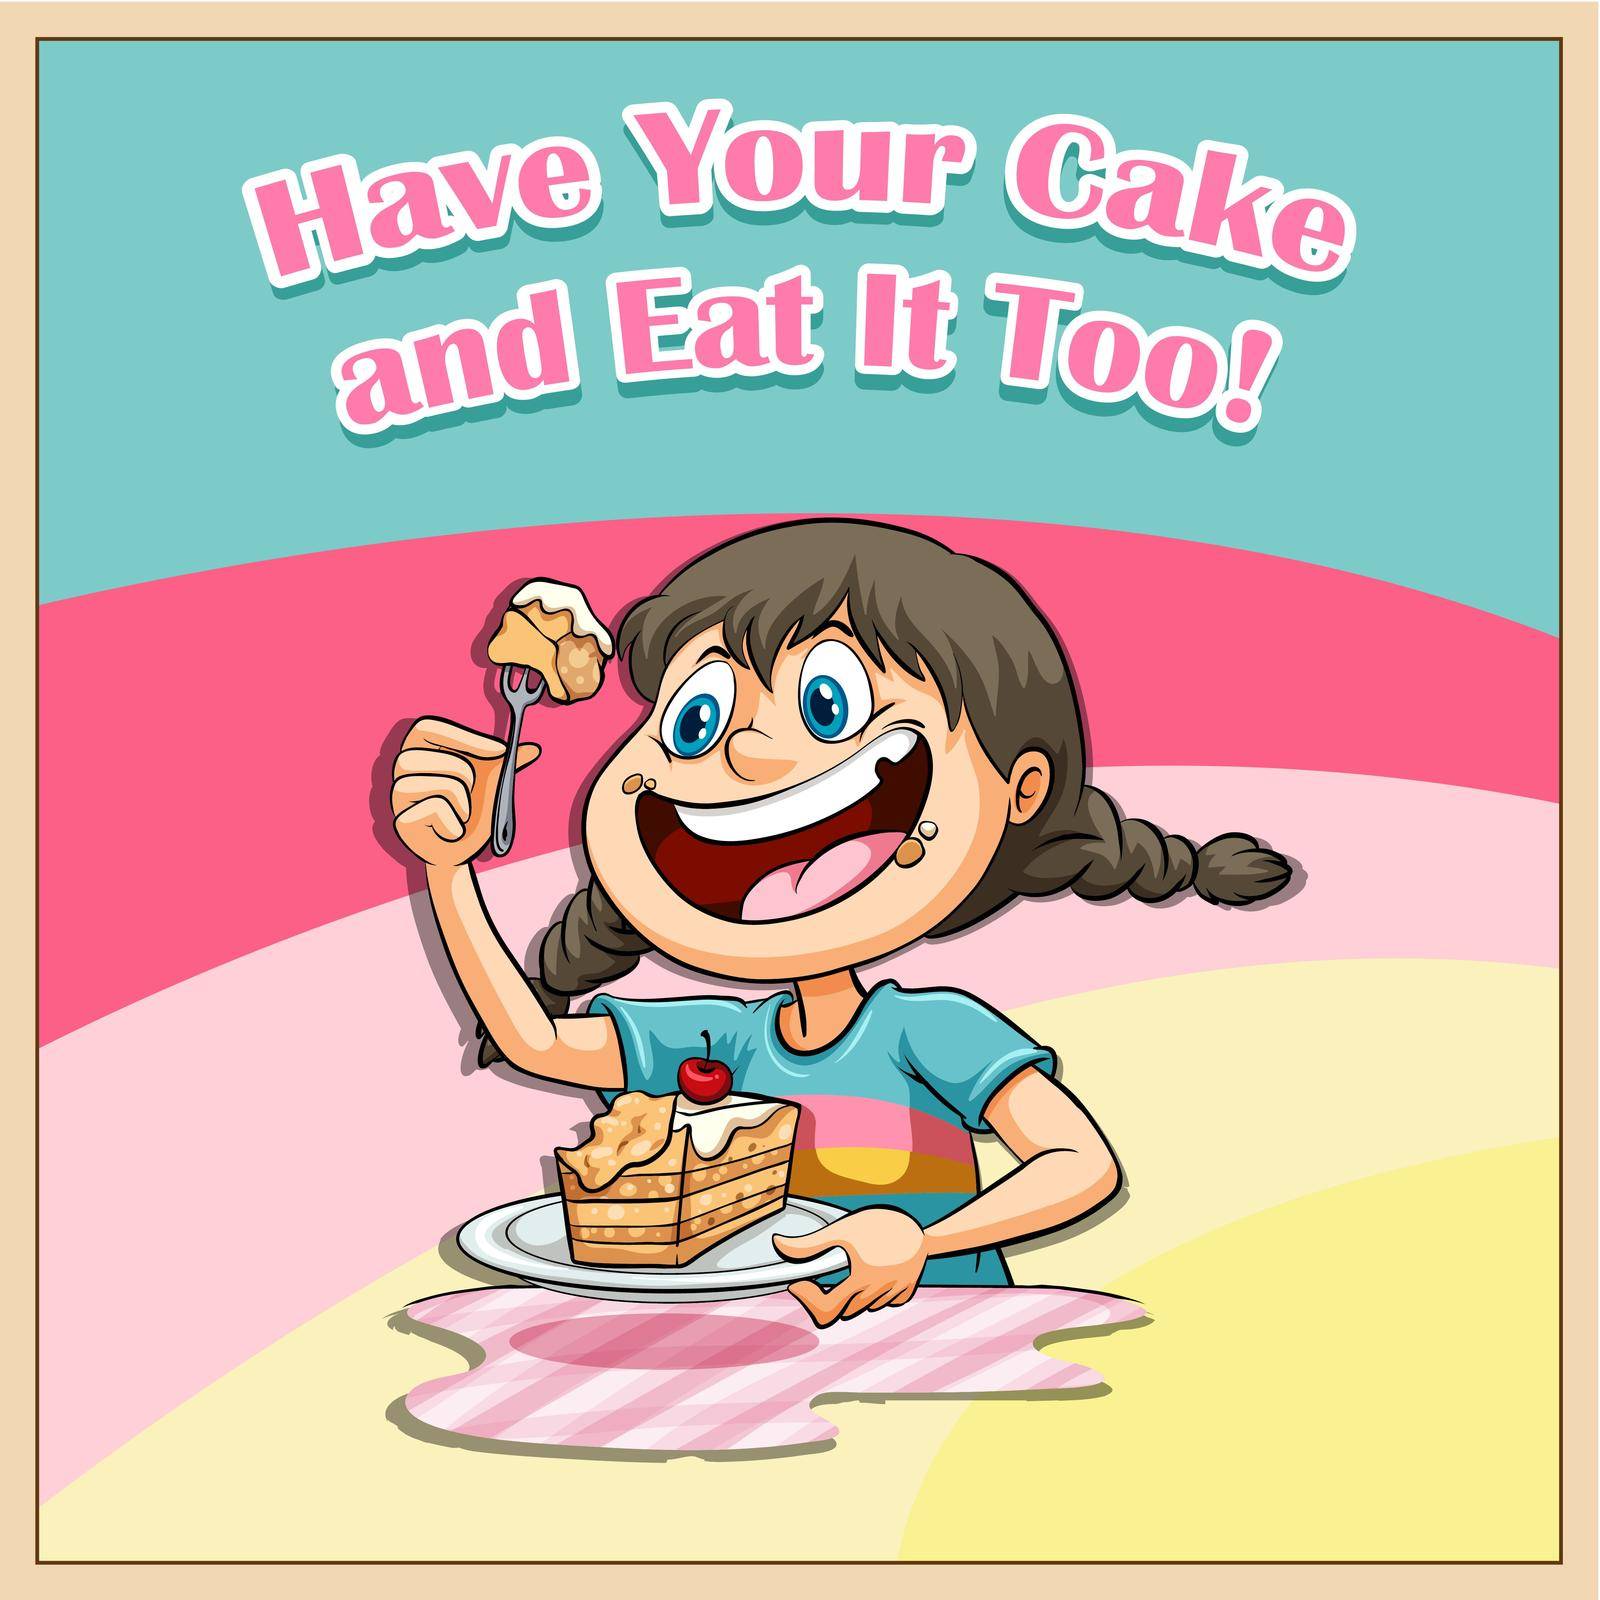 Have your cake and eat it too illustration